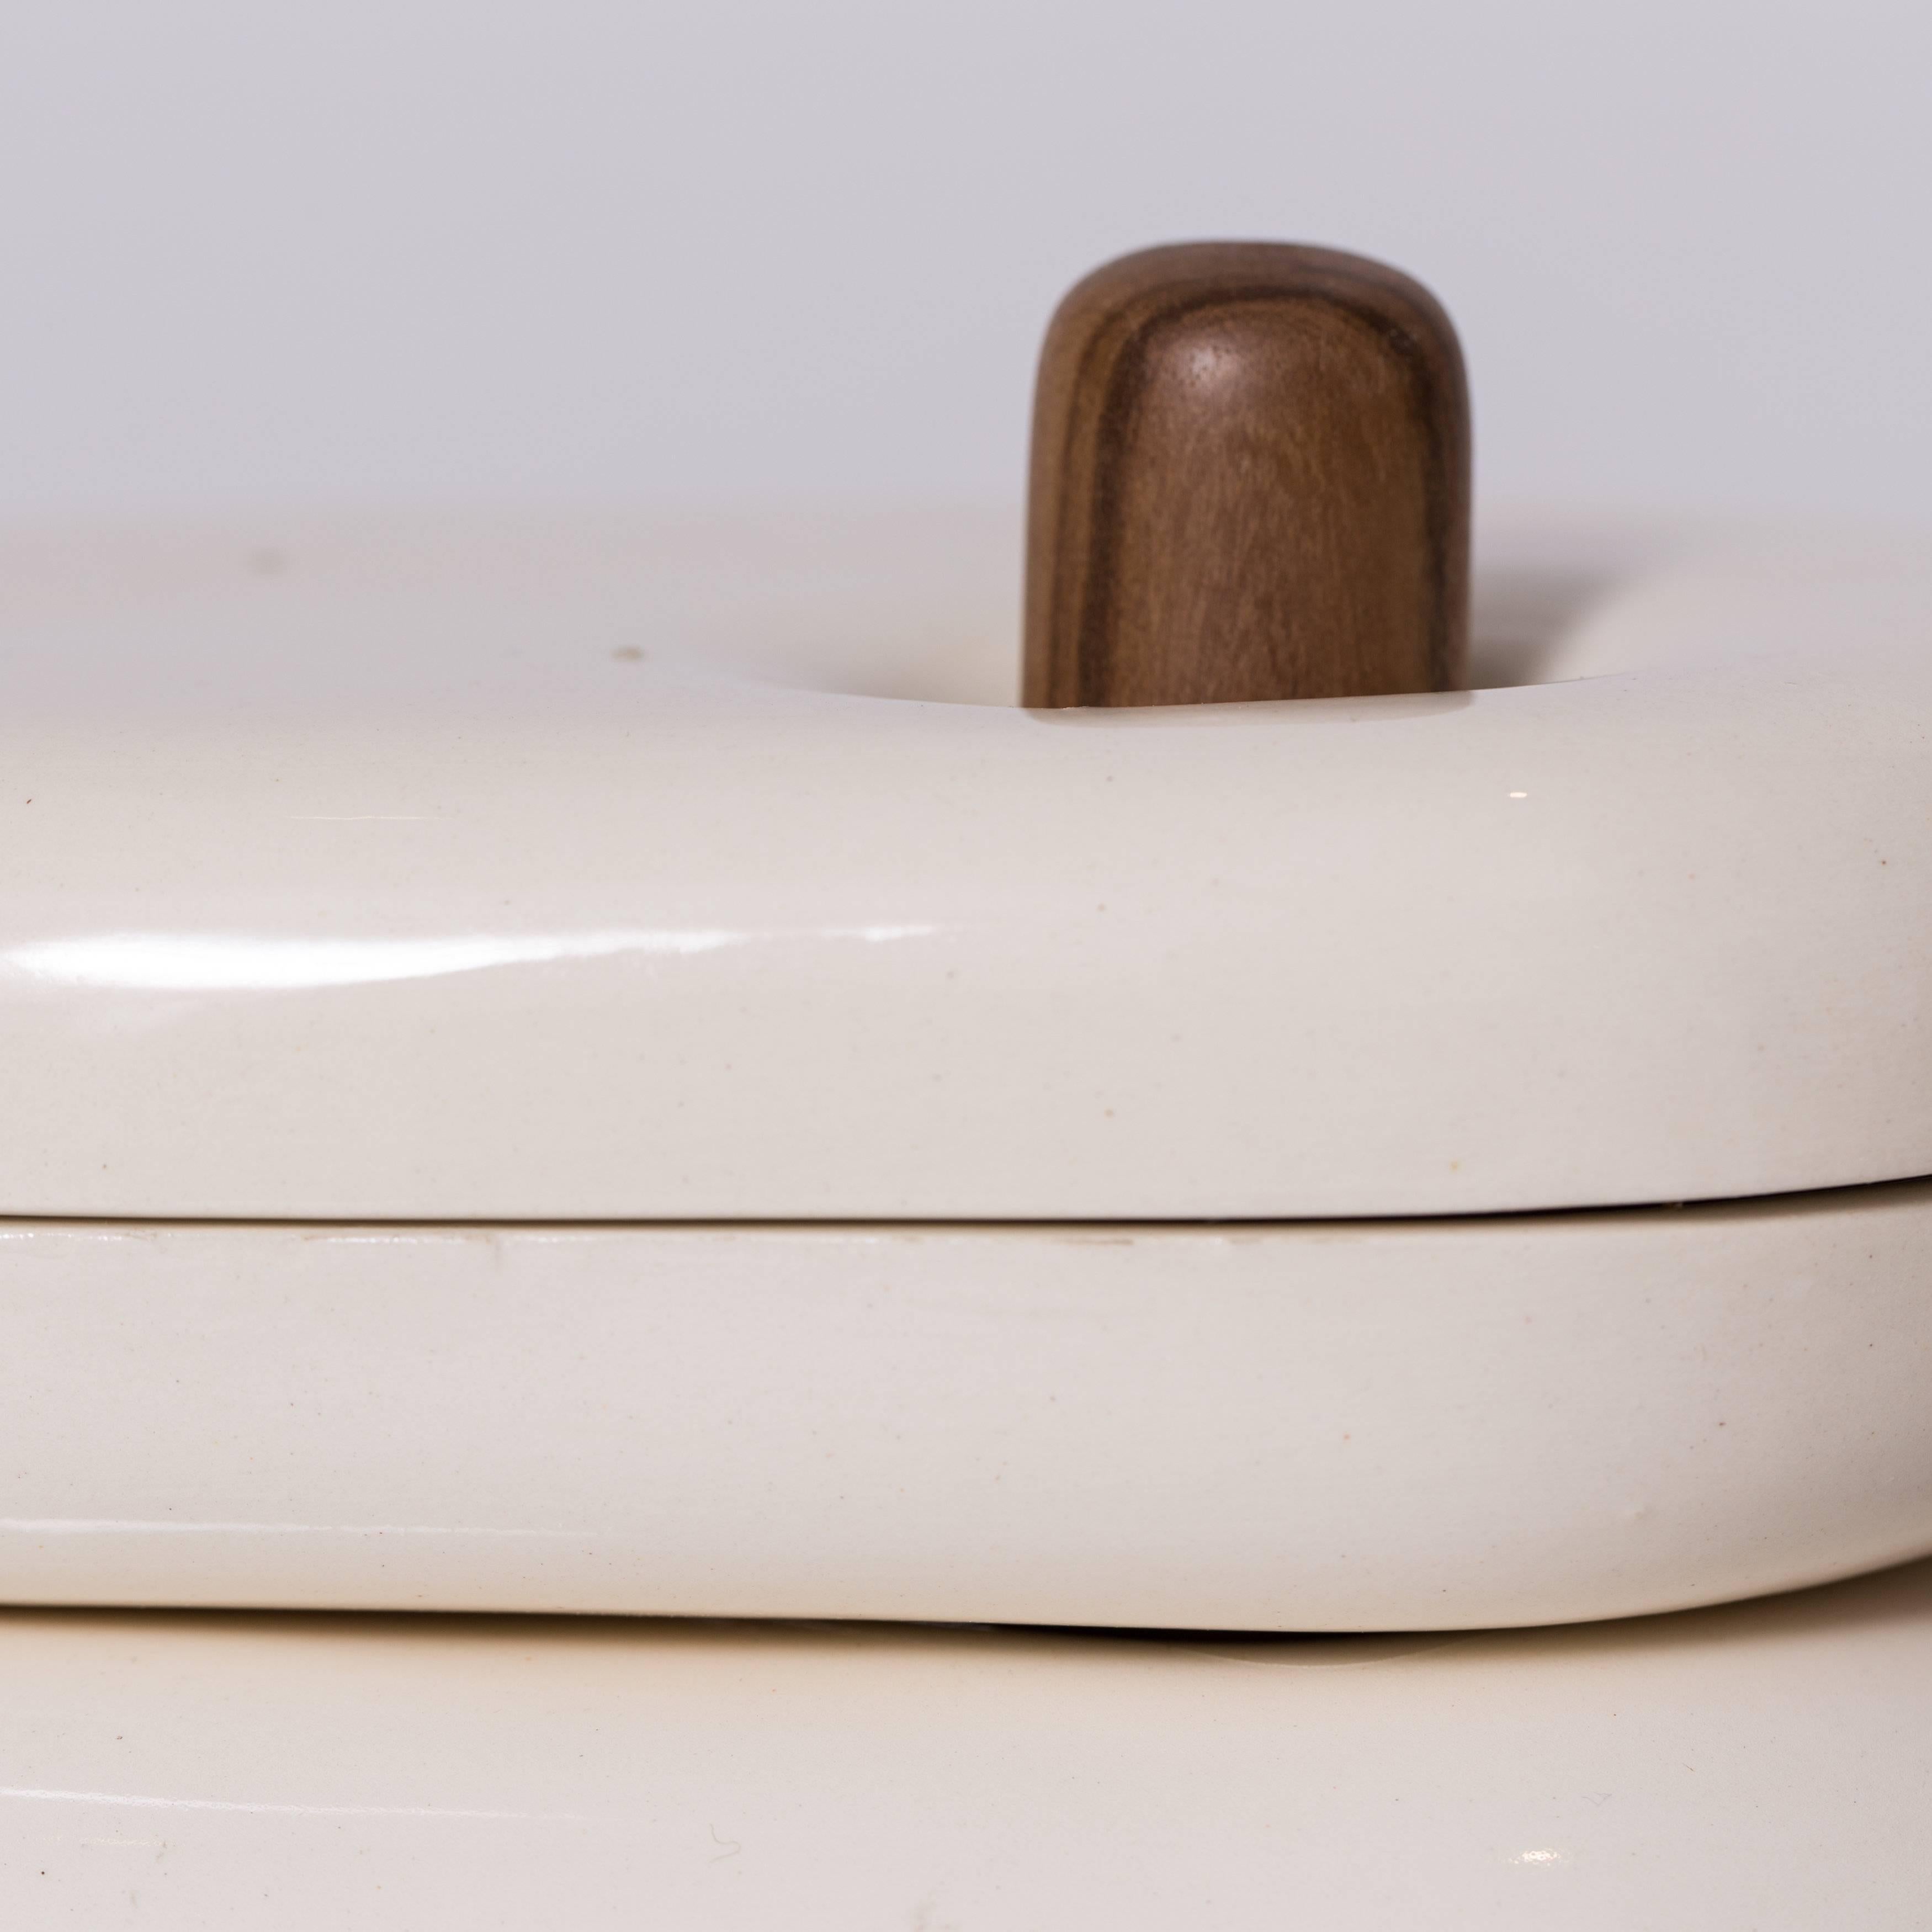 Gloss ceramic dish set on hand turned wood stand by El Salvadorian industrial designer, Maria Jose Nuñez. Maria's focus is on the mixture of crafts and new technology. Designed in 2014, this product was selected to represent El Salvador in the